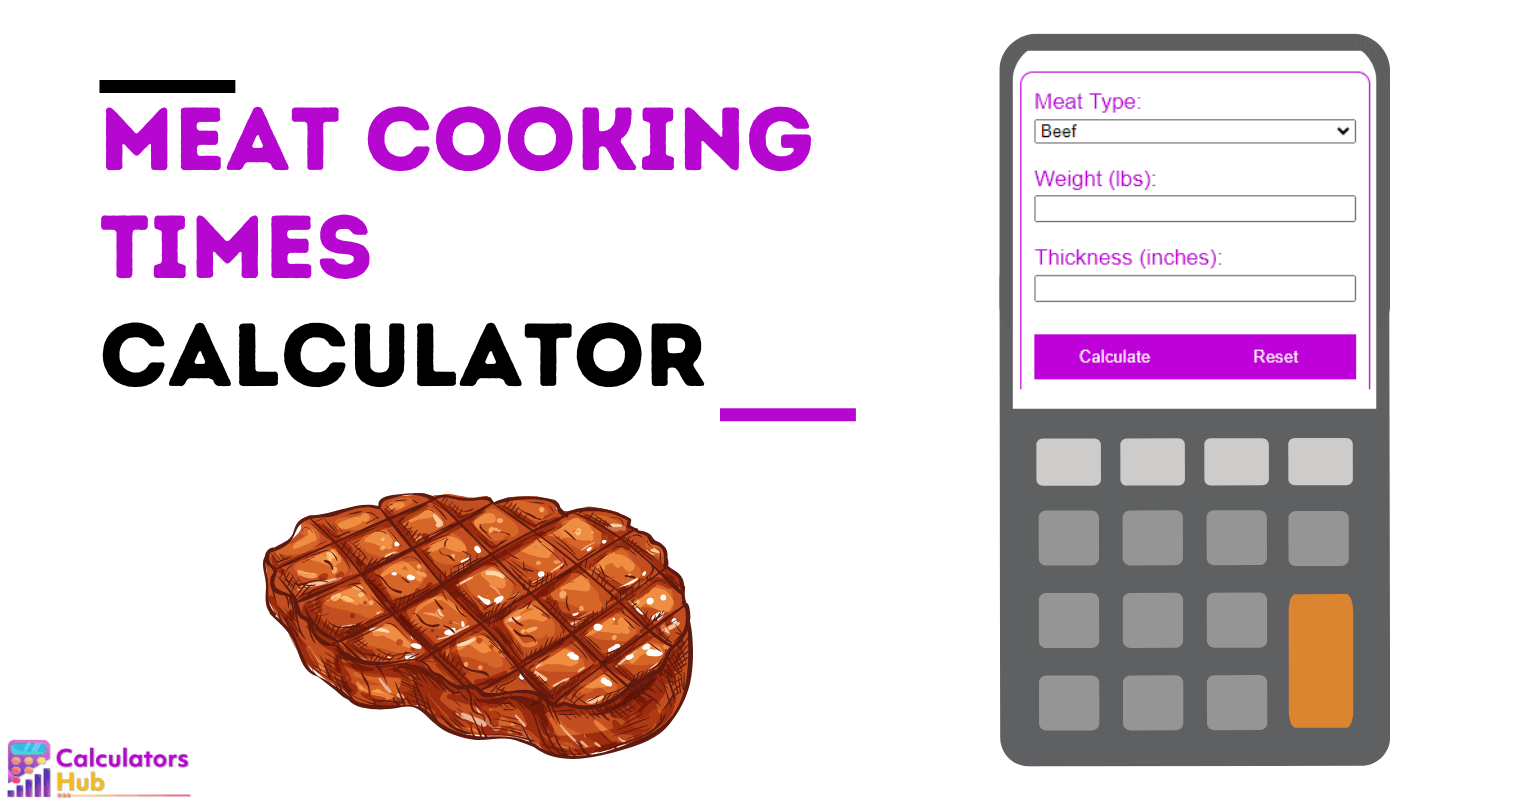 Meat Cooking Times Calculator